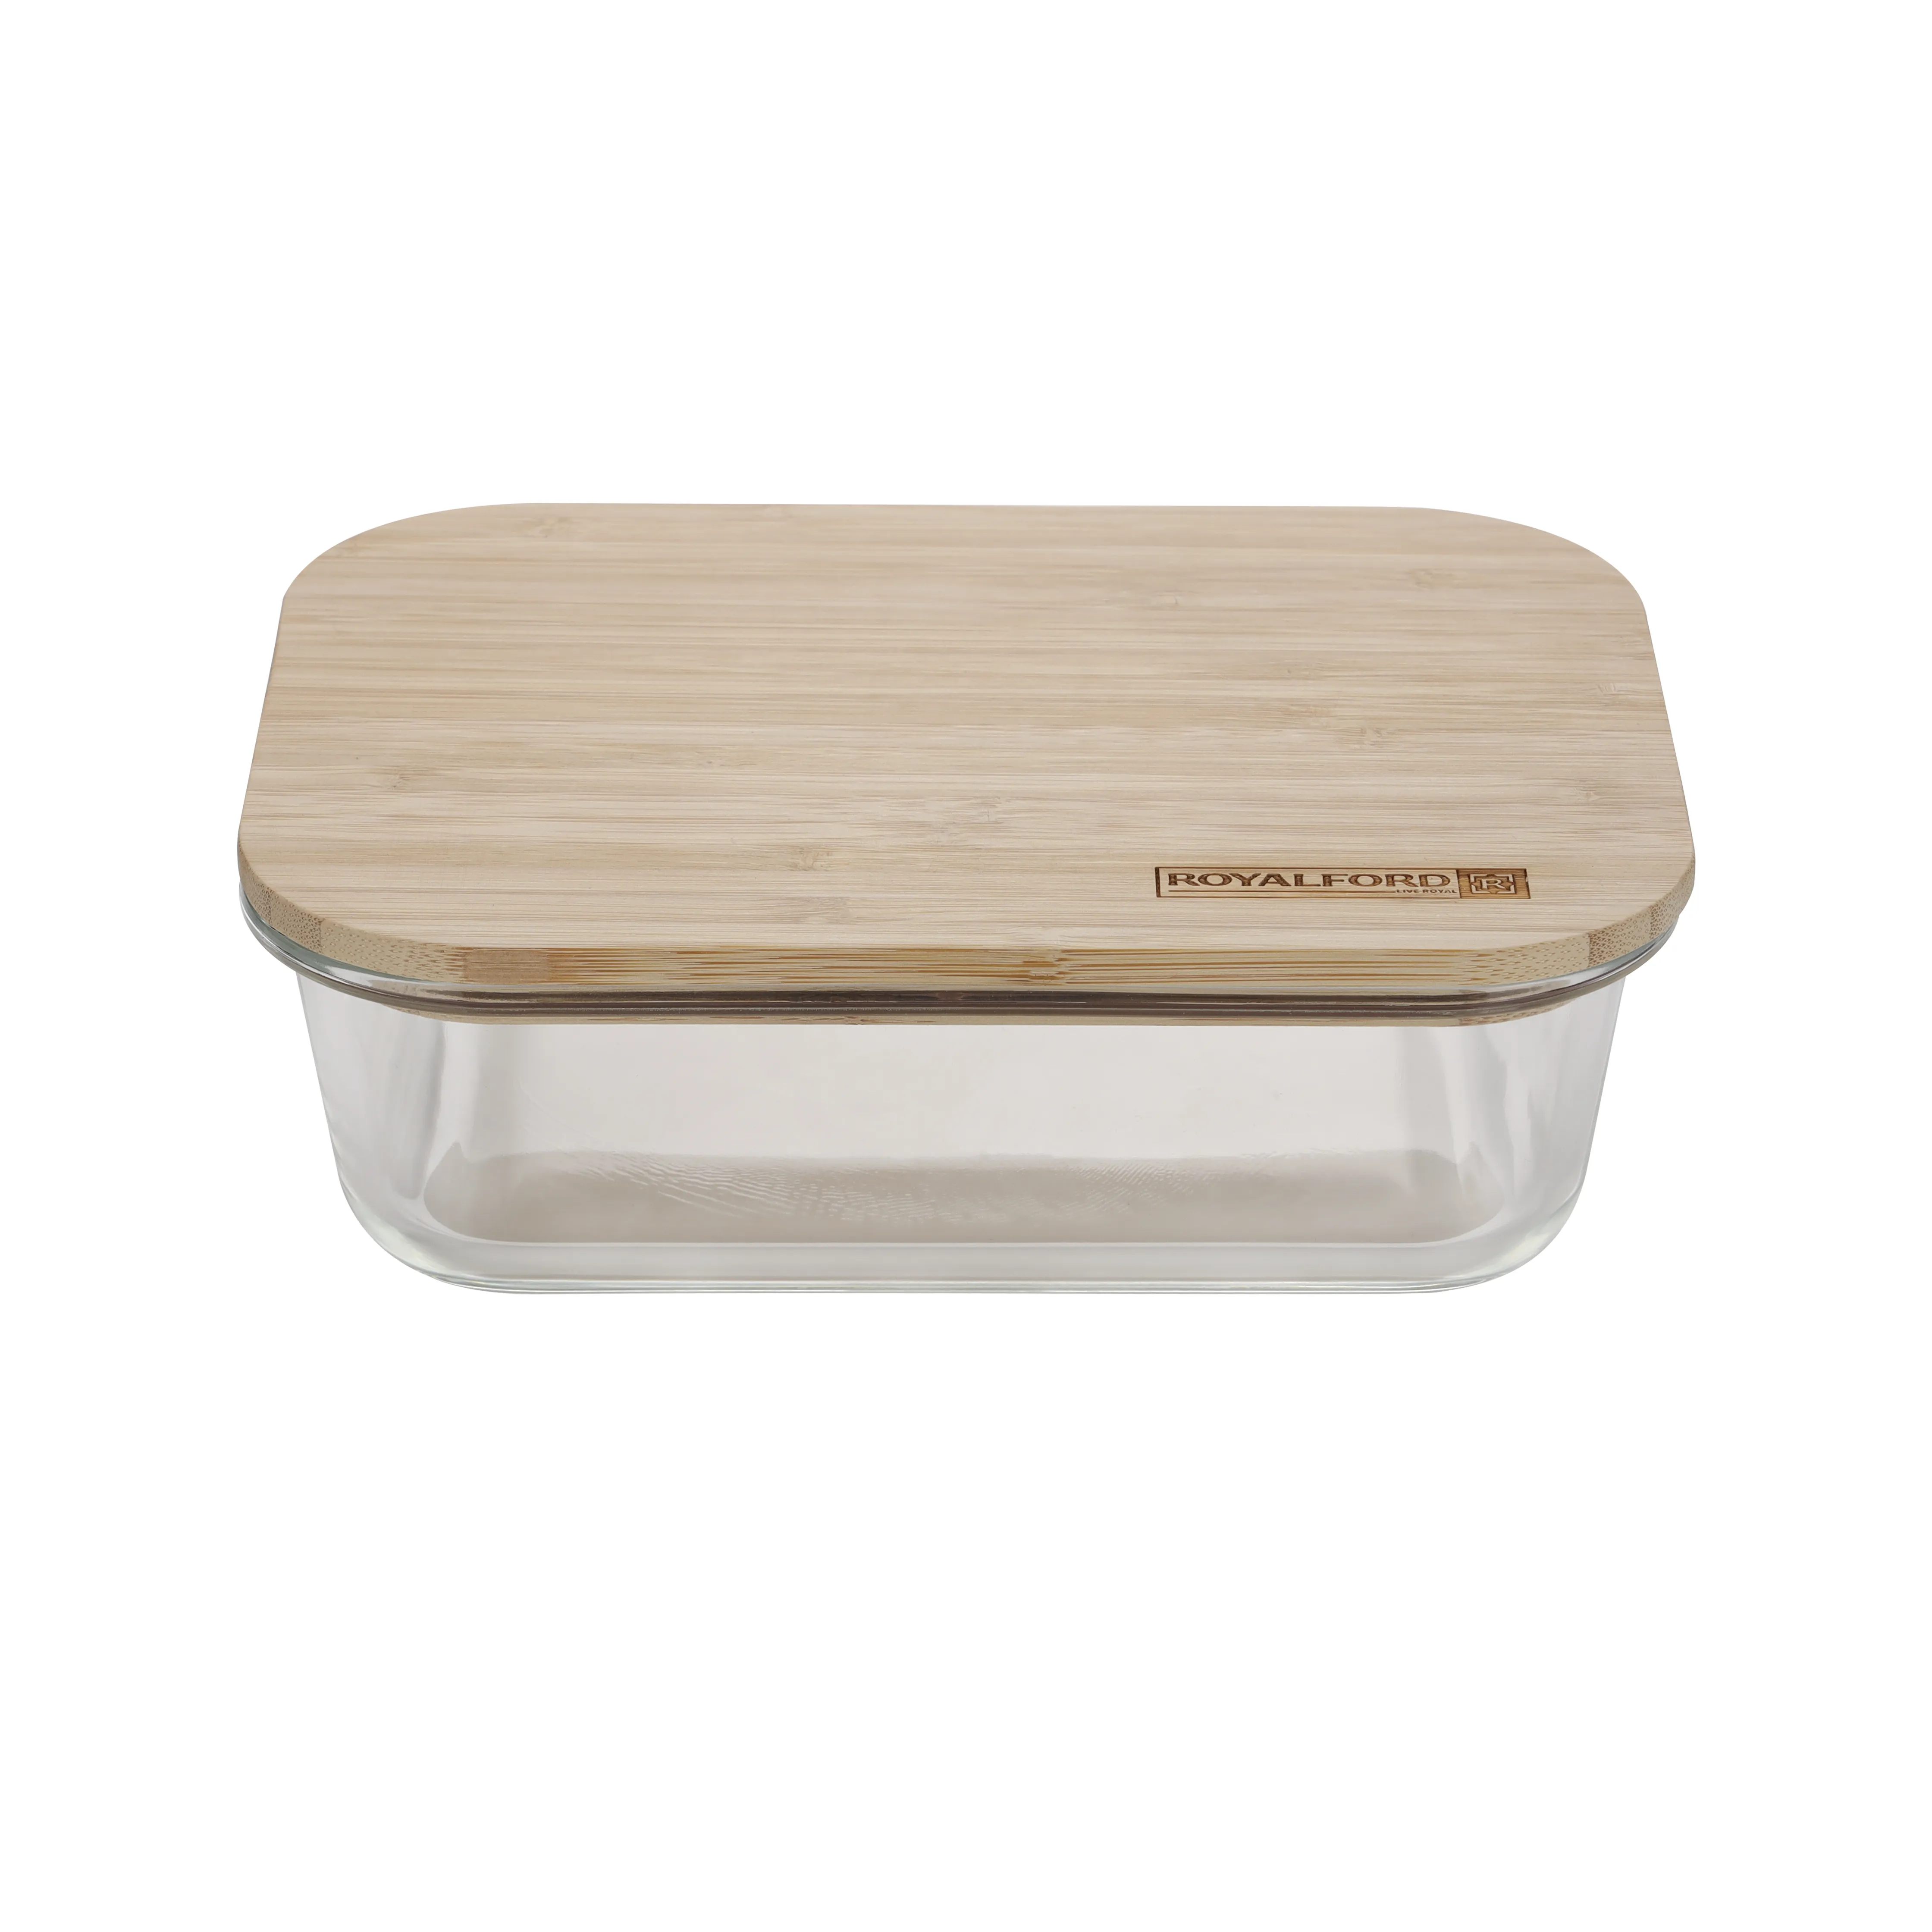 Royalford Rectangular Glass Food Container with Bamboo Lid, RF10319 - 640ml Capacity, Freezer & Dishwasher Safe, Air Tight Lid with Silicone Sealing Ring